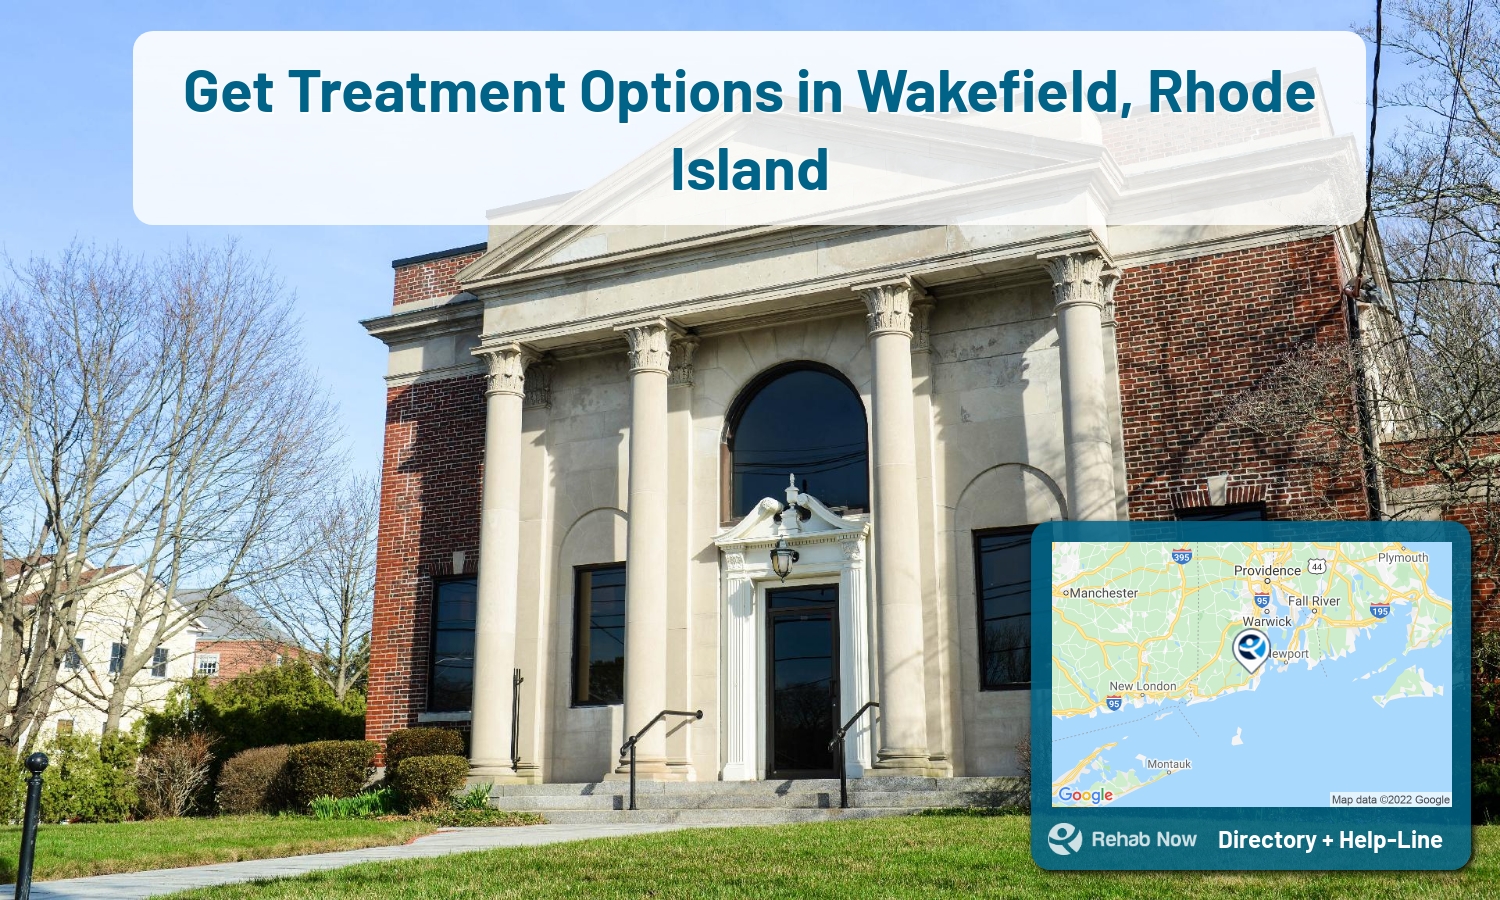 Find drug rehab and alcohol treatment services in Wakefield. Our experts help you find a center in Wakefield, Rhode Island